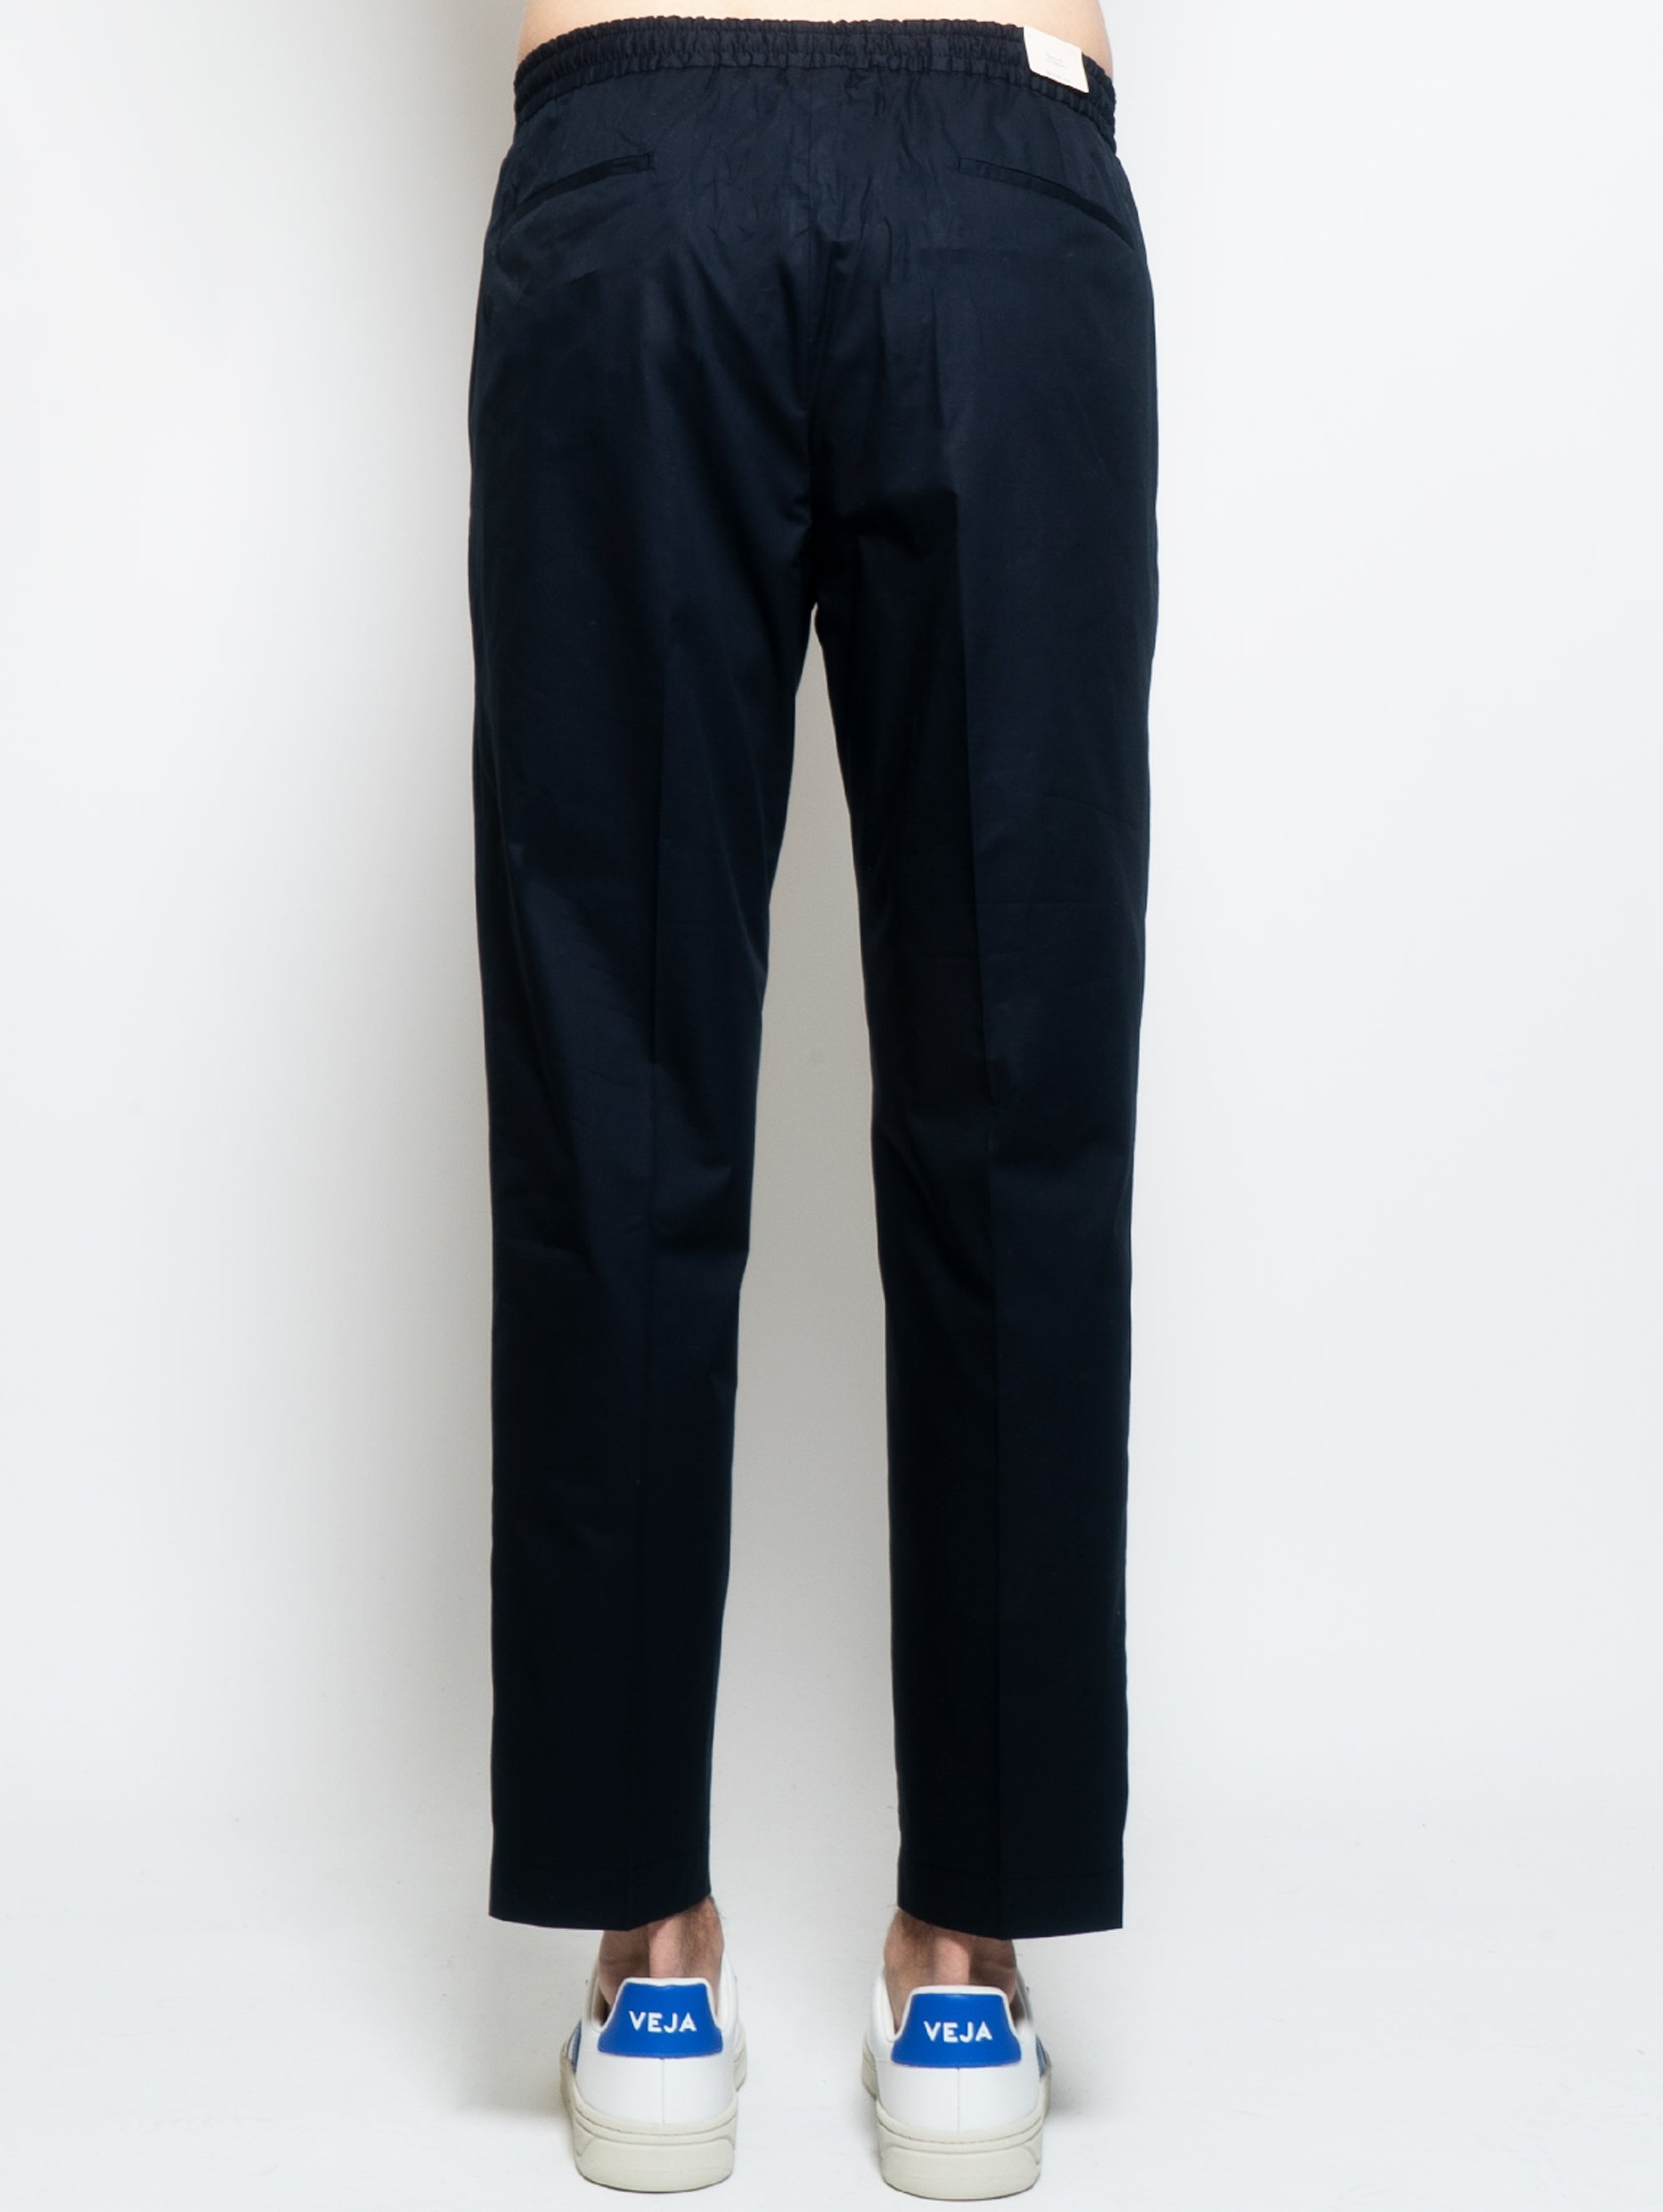 Pants with Drawstring and Blue Pleats